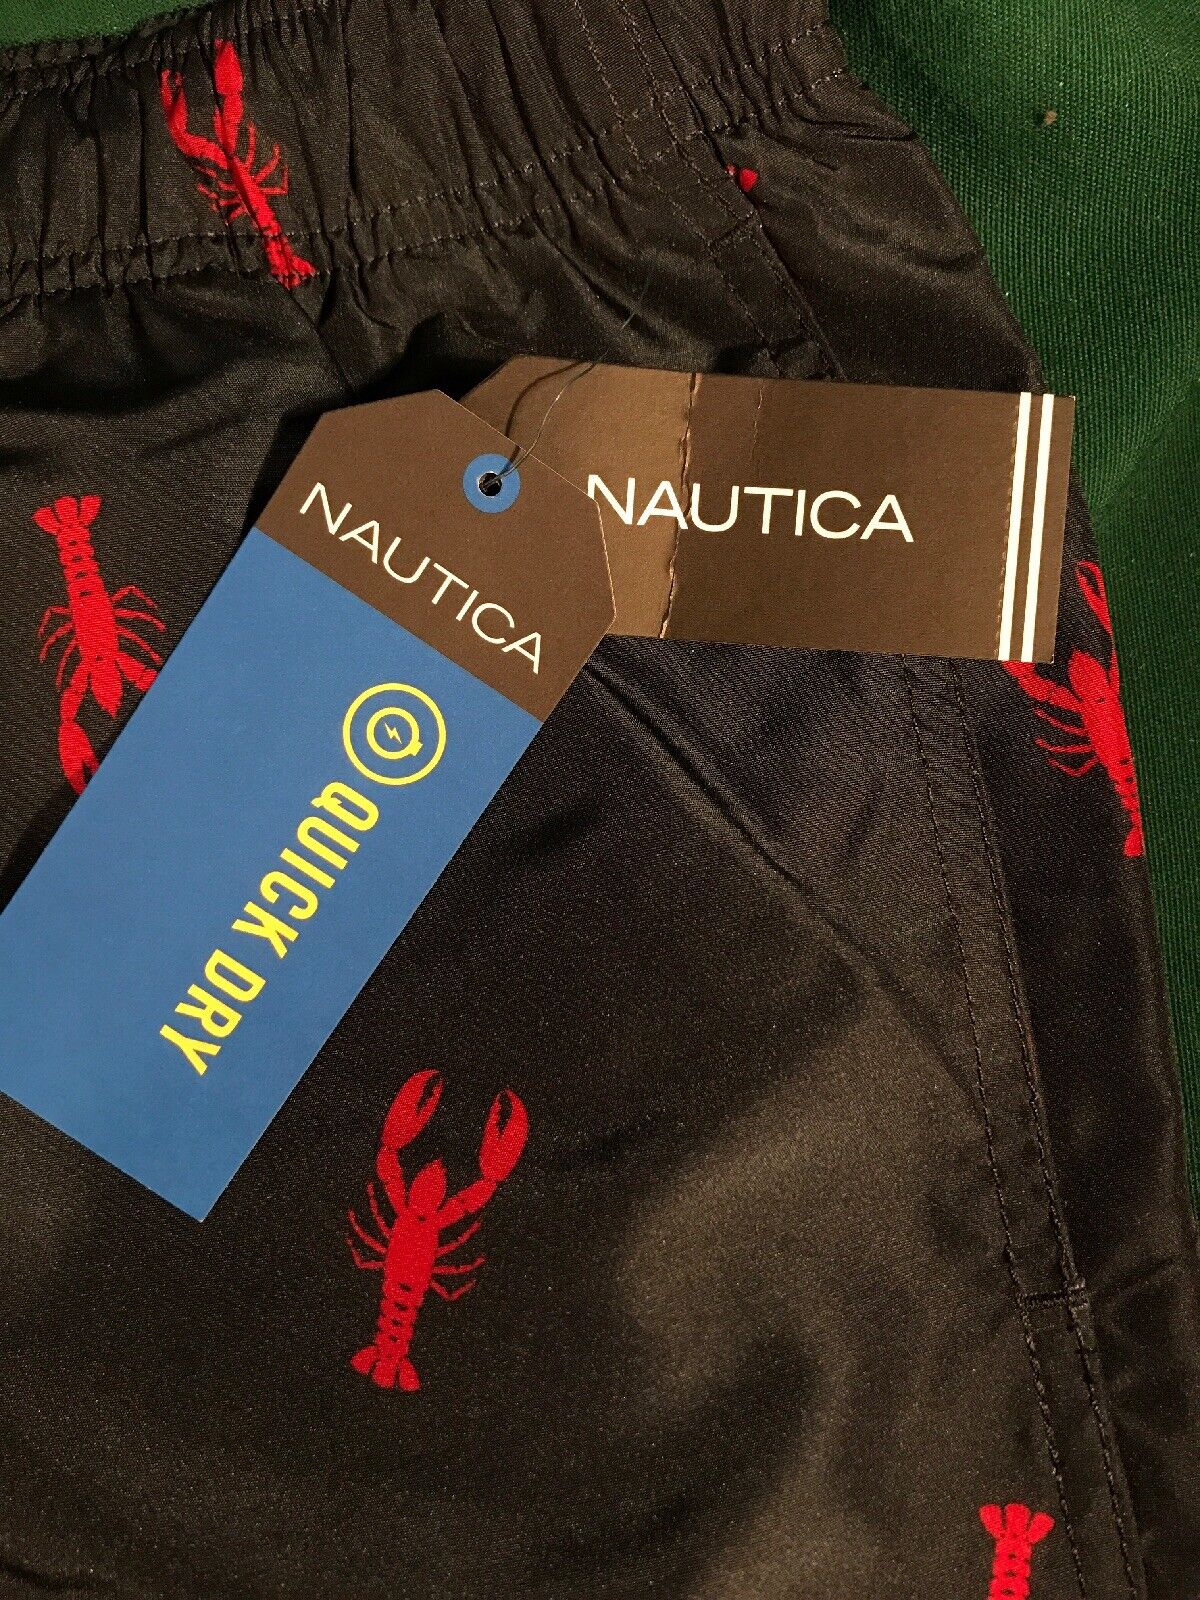 Nautica Men's M Navy Blue Red Lobster Nautical Quick Dry Bathing Suit trunks